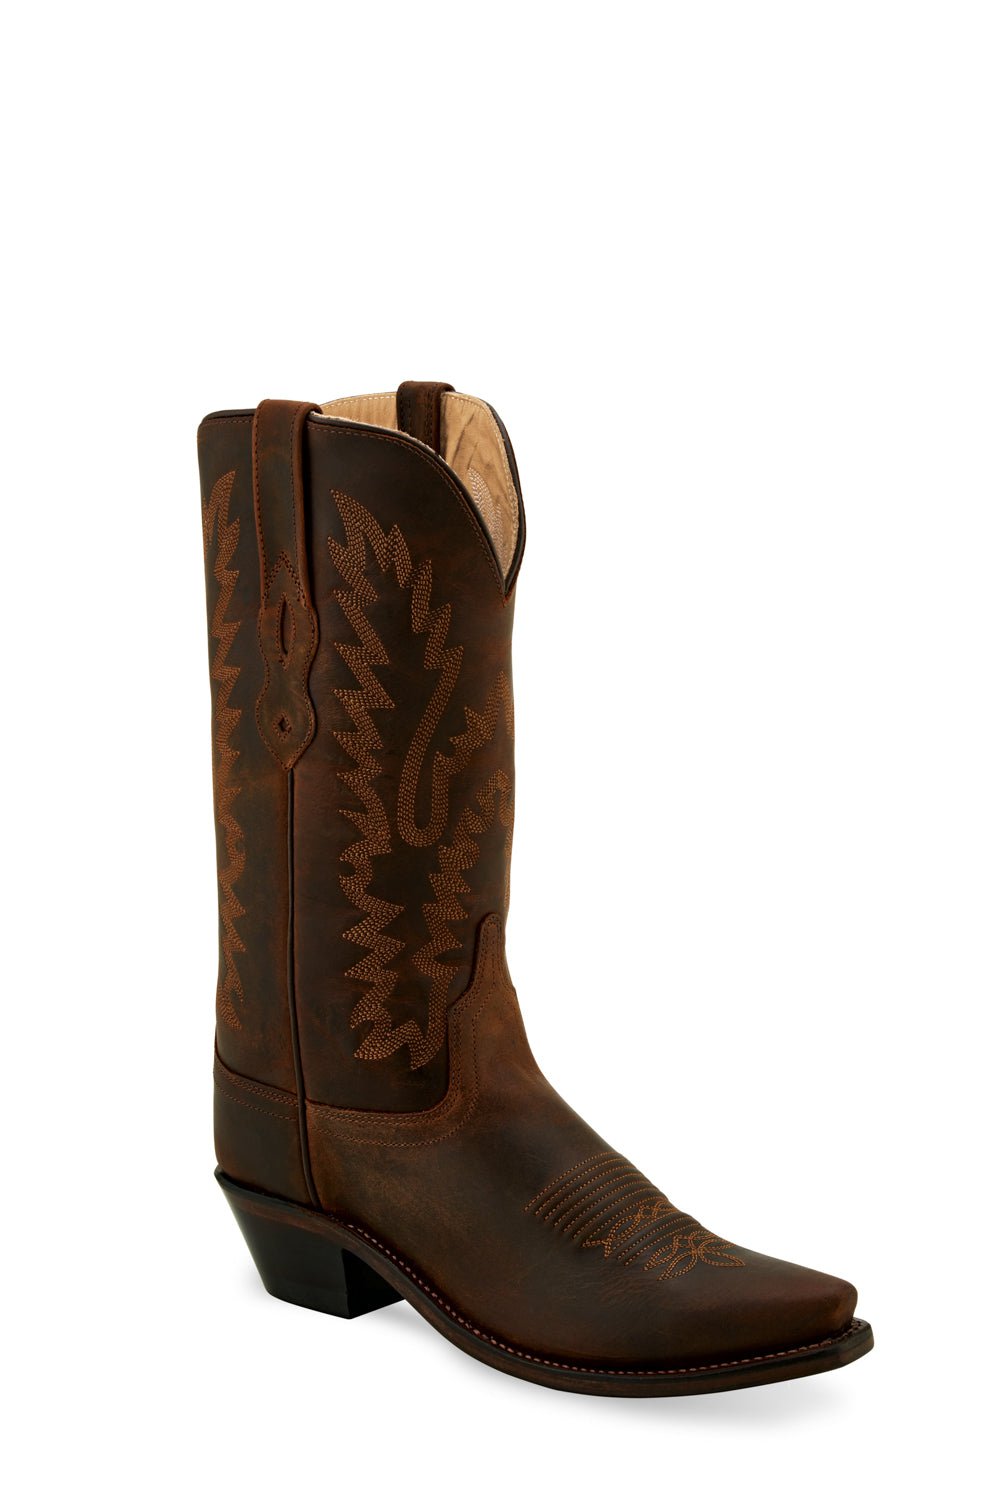 authentic western boots